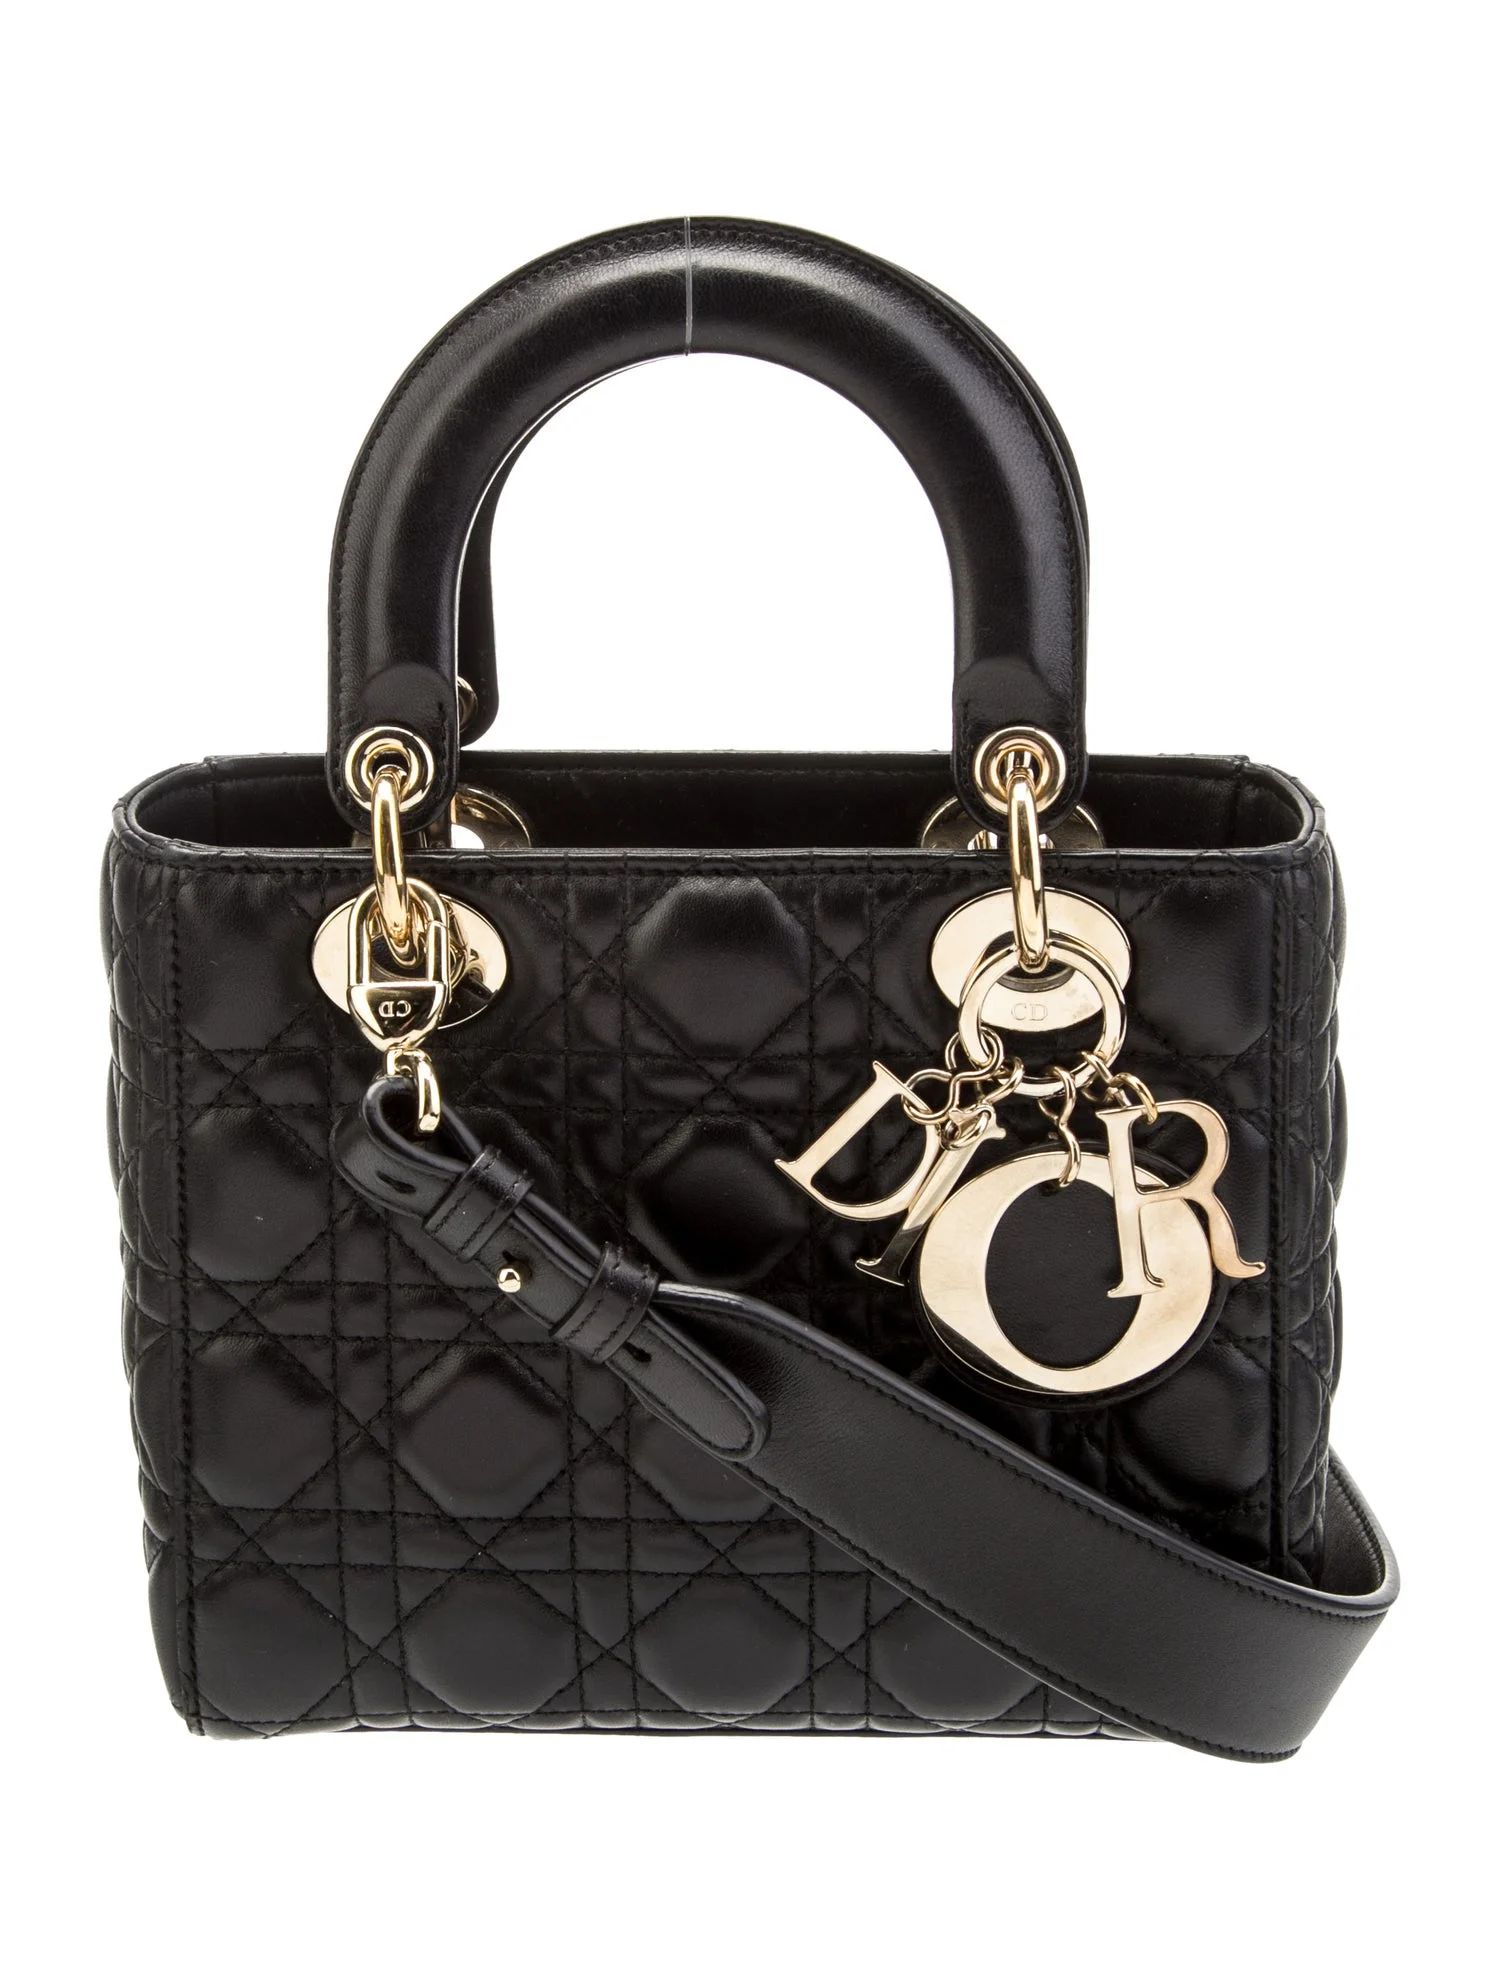 Small Cannage Lady Dior Bag | The RealReal